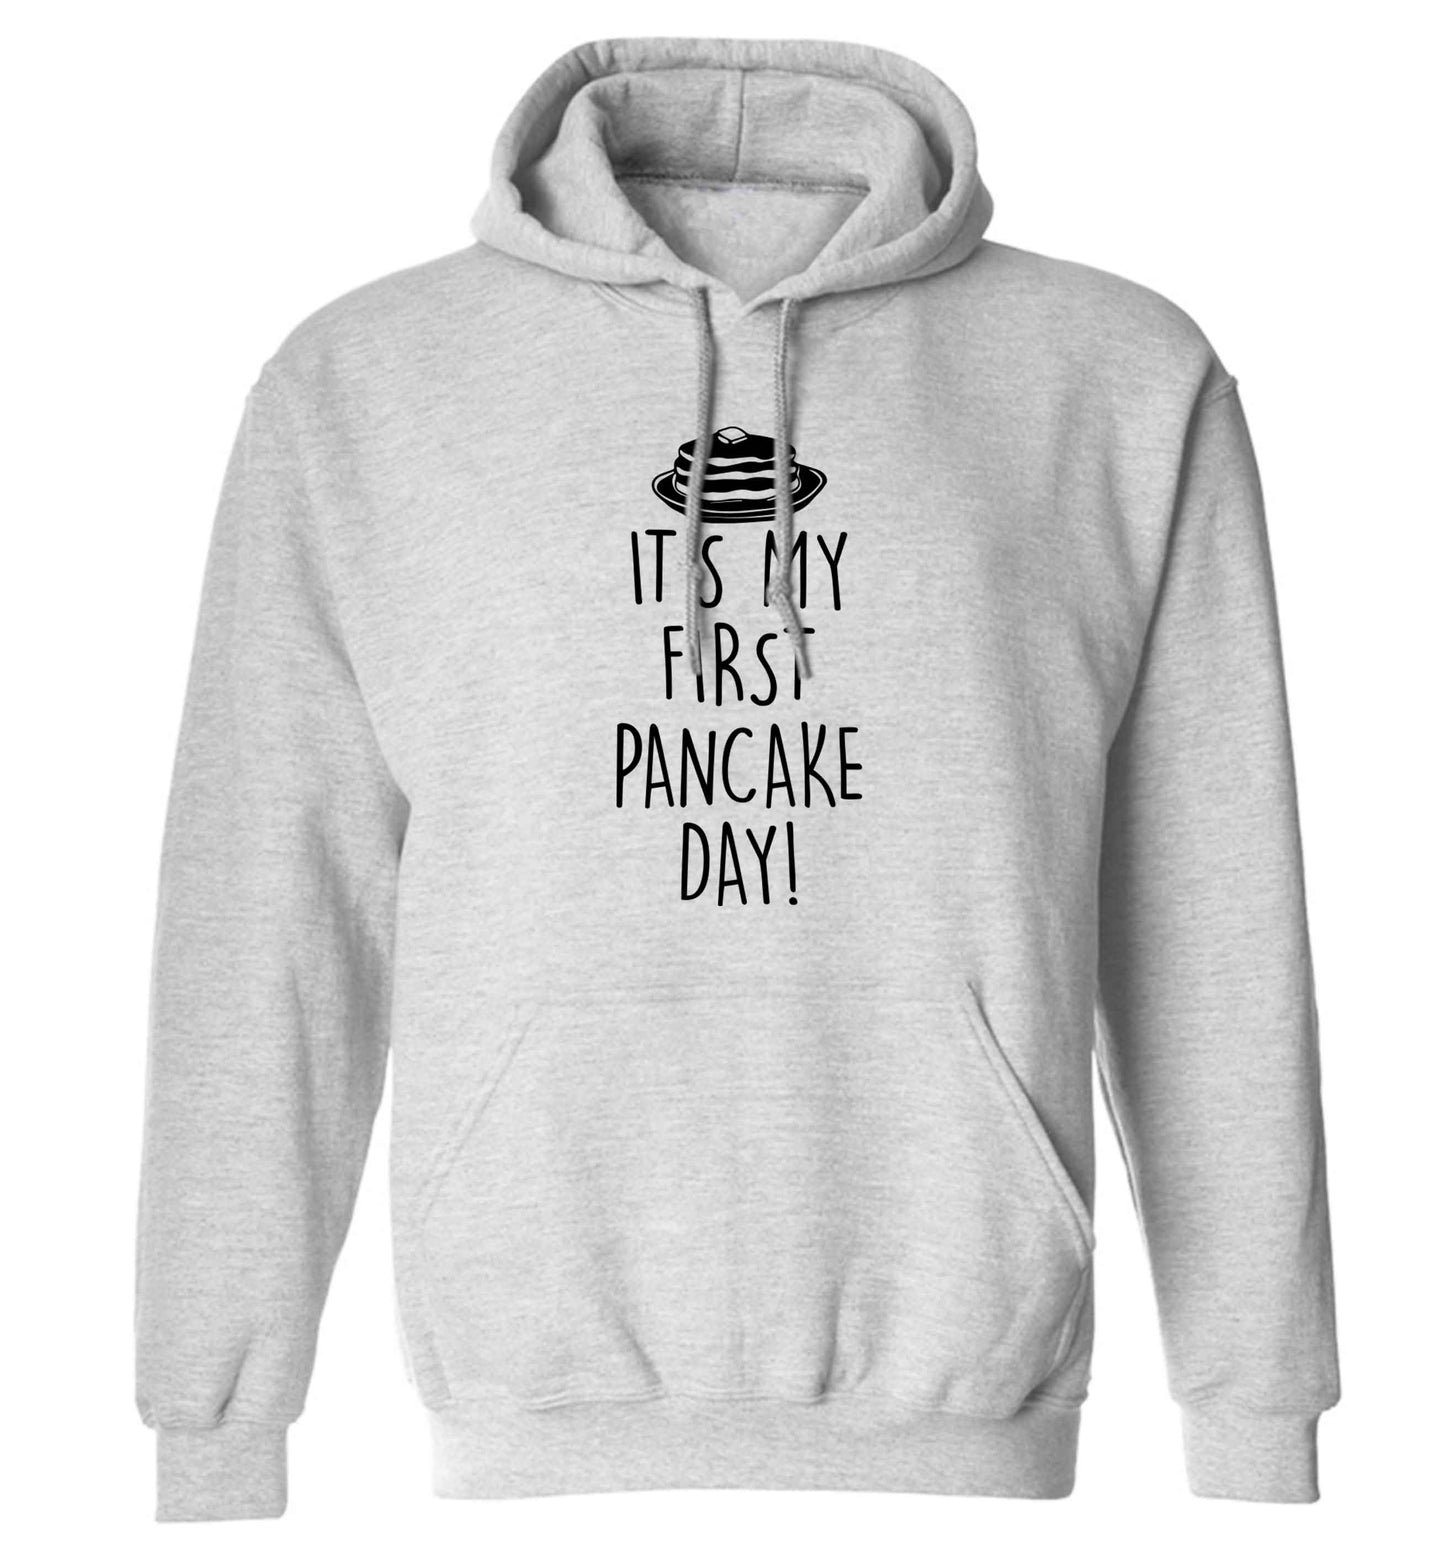 It's my first pancake day adults unisex grey hoodie 2XL